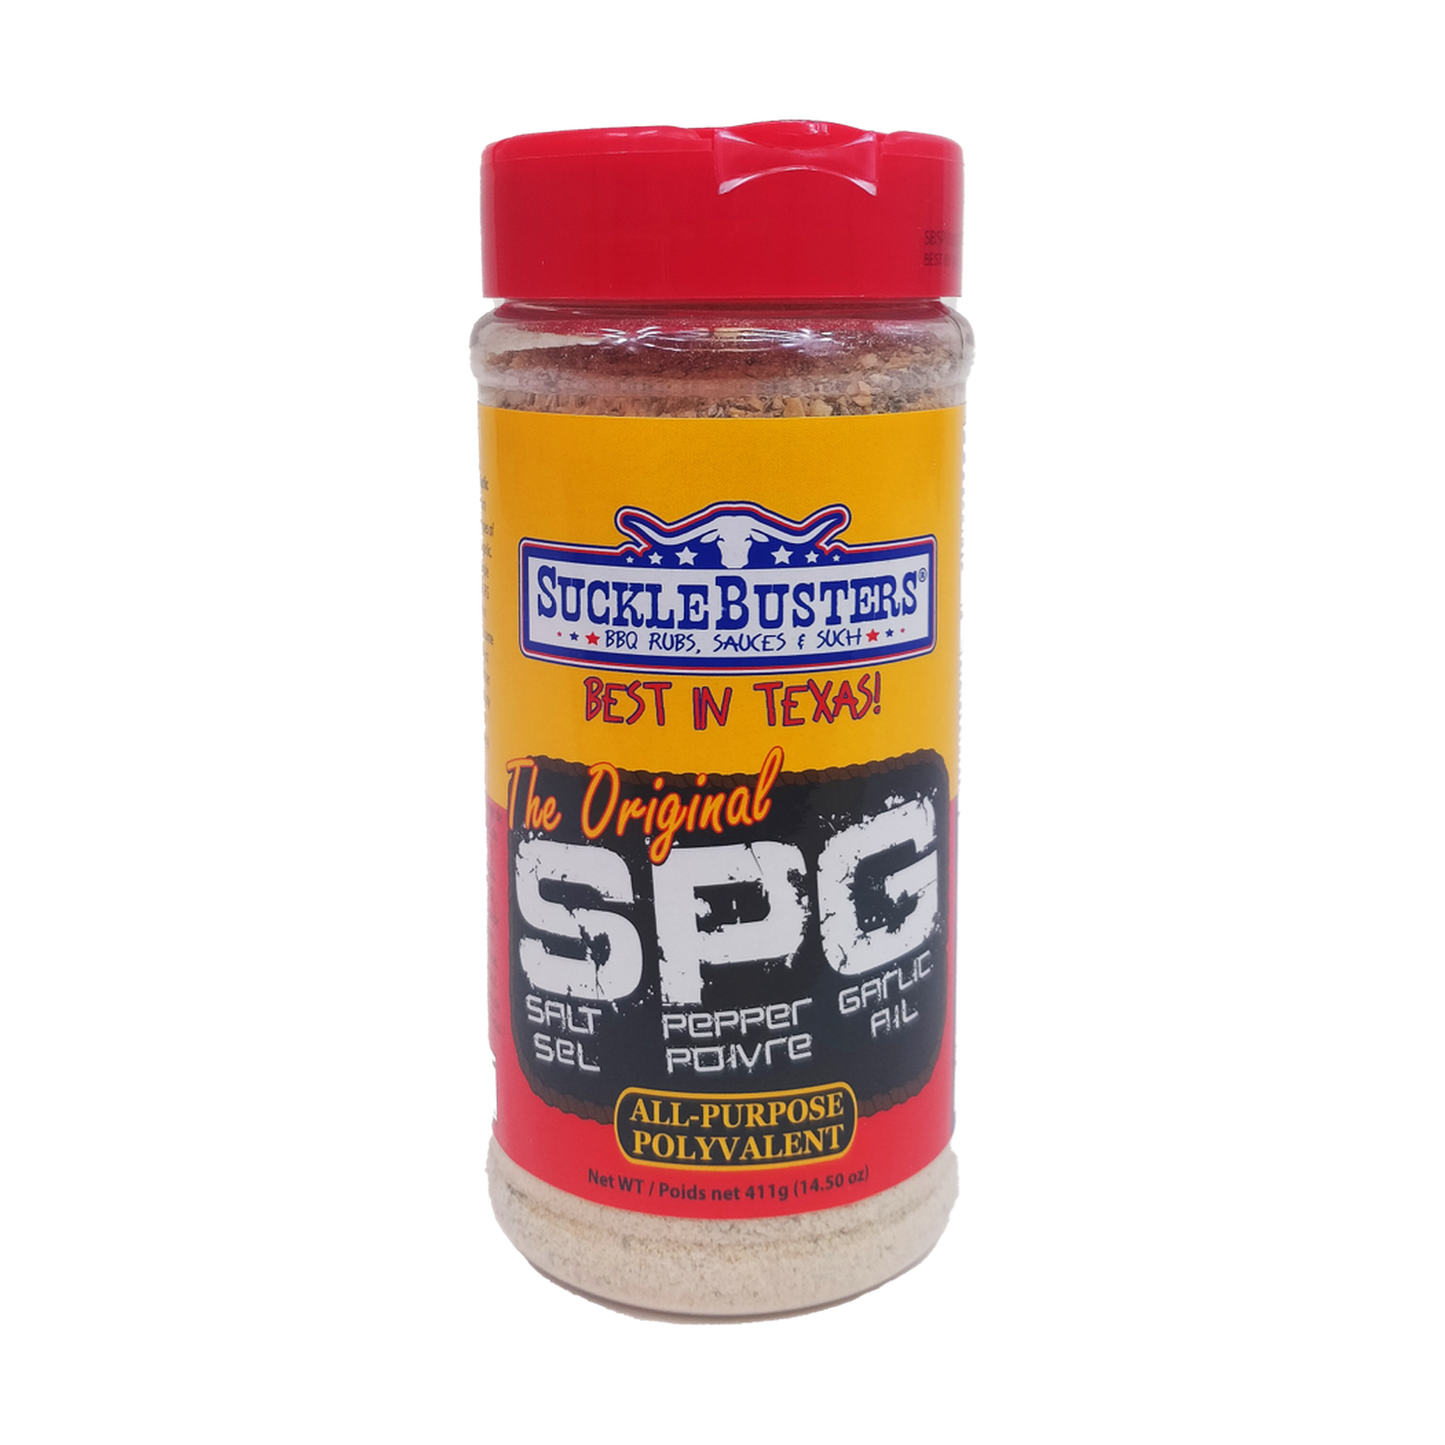 SuckleBusters S.P.G. All Purpose BBQ Rub Suckle Busters Chilliwack BBQ Supply